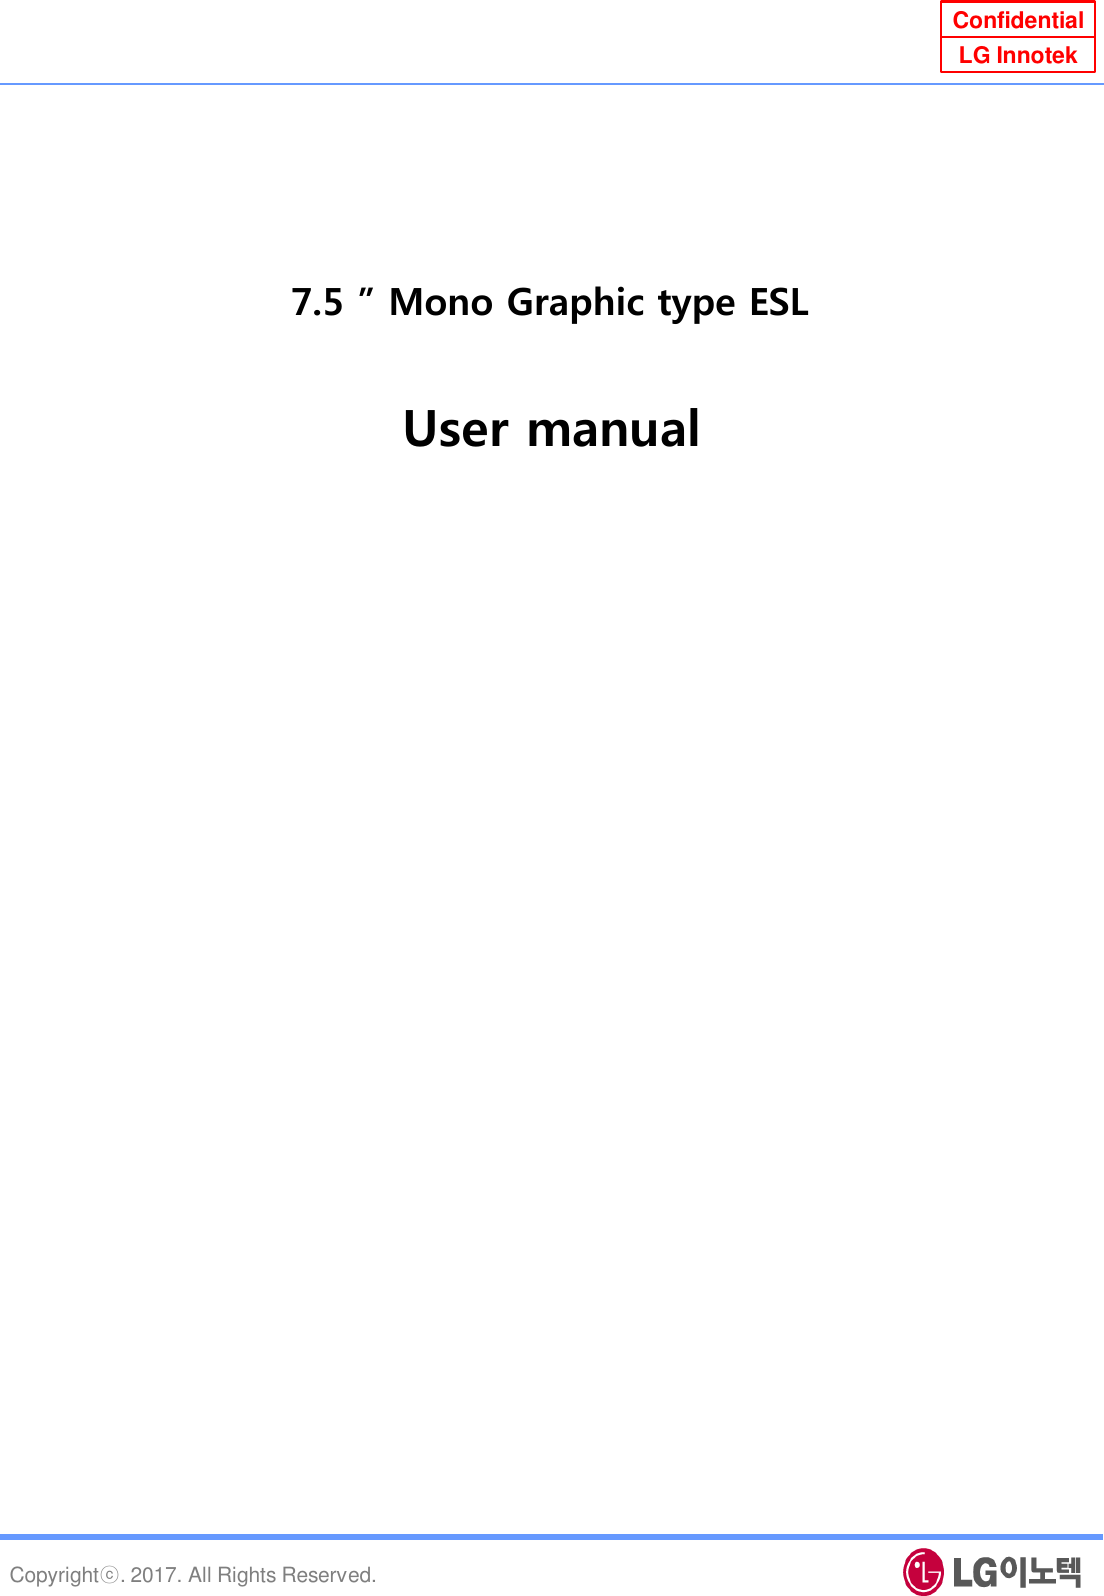 Copyrightⓒ. 2017. All Rights Reserved. Confidential LG Innotek 7.5 ” Mono Graphic type ESL User manual 